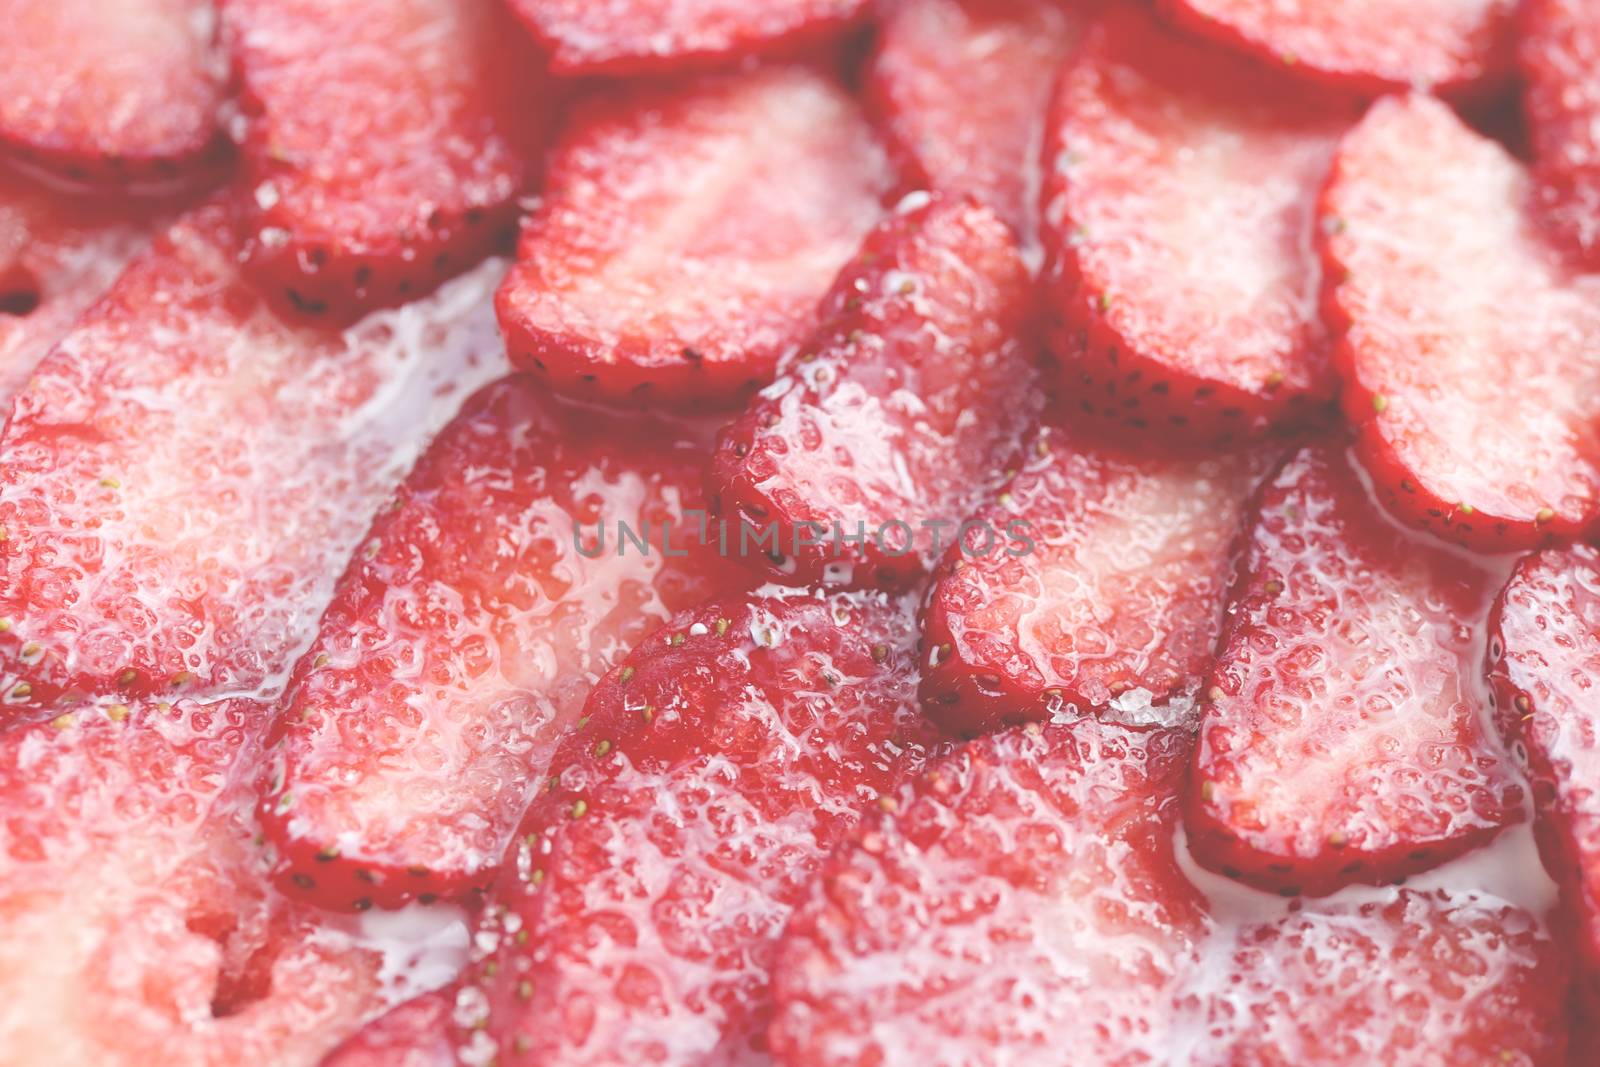 Fresh vitamin berry backdrop. Sliced strawberry in sugar cream filling background. Red healthy tasty strawberry’s with sugar plum texture.